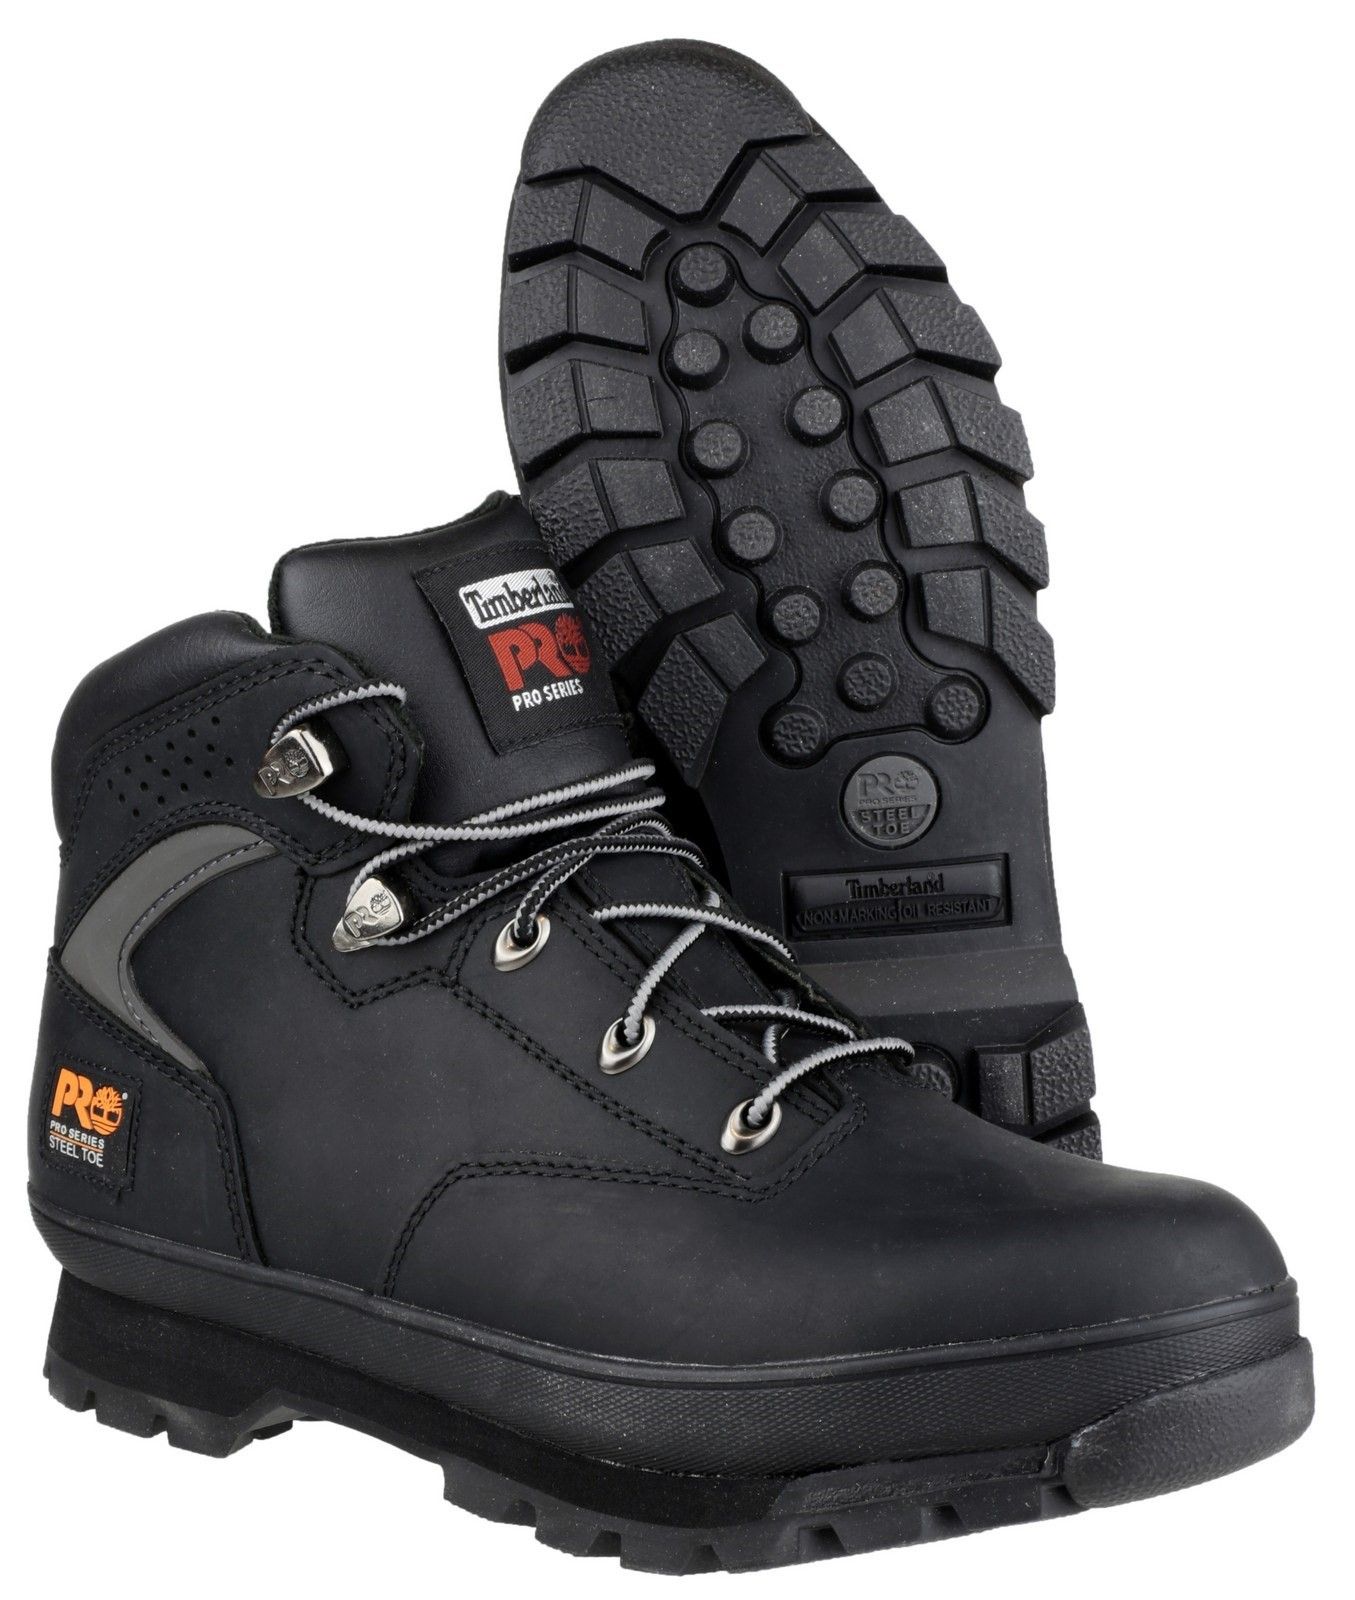 A MODERN CLASSIC: The Timberland PRO Euro Hiker features a timeless silhouette that speaks to Timberlands heritage, but is now built with a wider sole platform and a lower center of gravity, providing stability and increased traction on surfaces.Impact and compression resistant toe cap. 
Penetration resistant to 1100 Newtons for flexible underfoot protection. 
Heel energy absorption 20 Joules. 
High heat resistance to 300 degrees. 
Slip resistance SRB - Resistance against slipping on smooth steel surfaces covered with water and cleaning products.